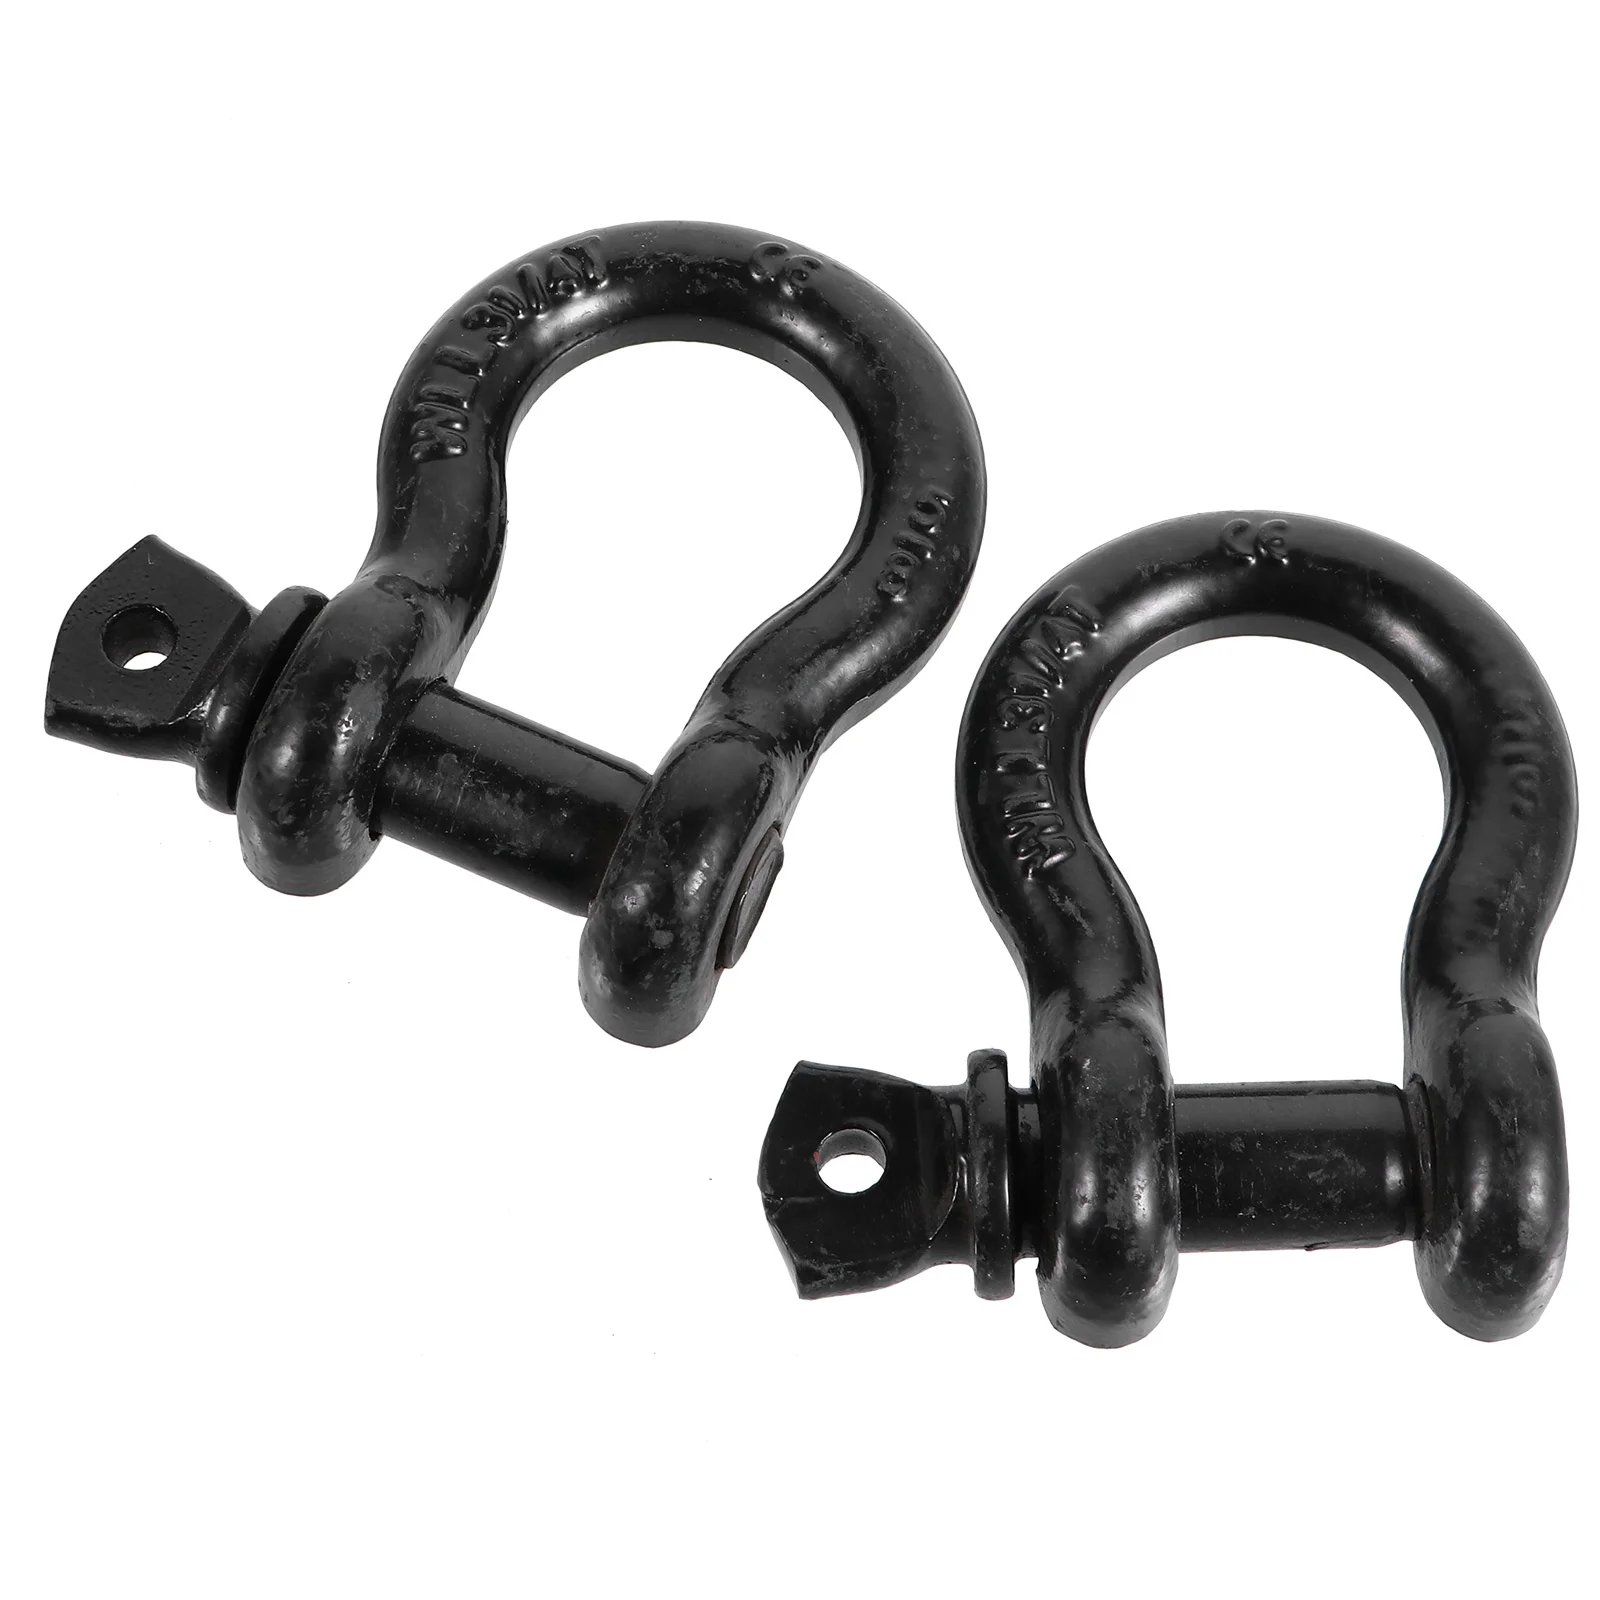 

2 Pcs Tow Strap Hook Bow Shackle Recovery Strap Hook Stainless Towing D- Rings Clevis Shackles Stainless Steel D- Rings